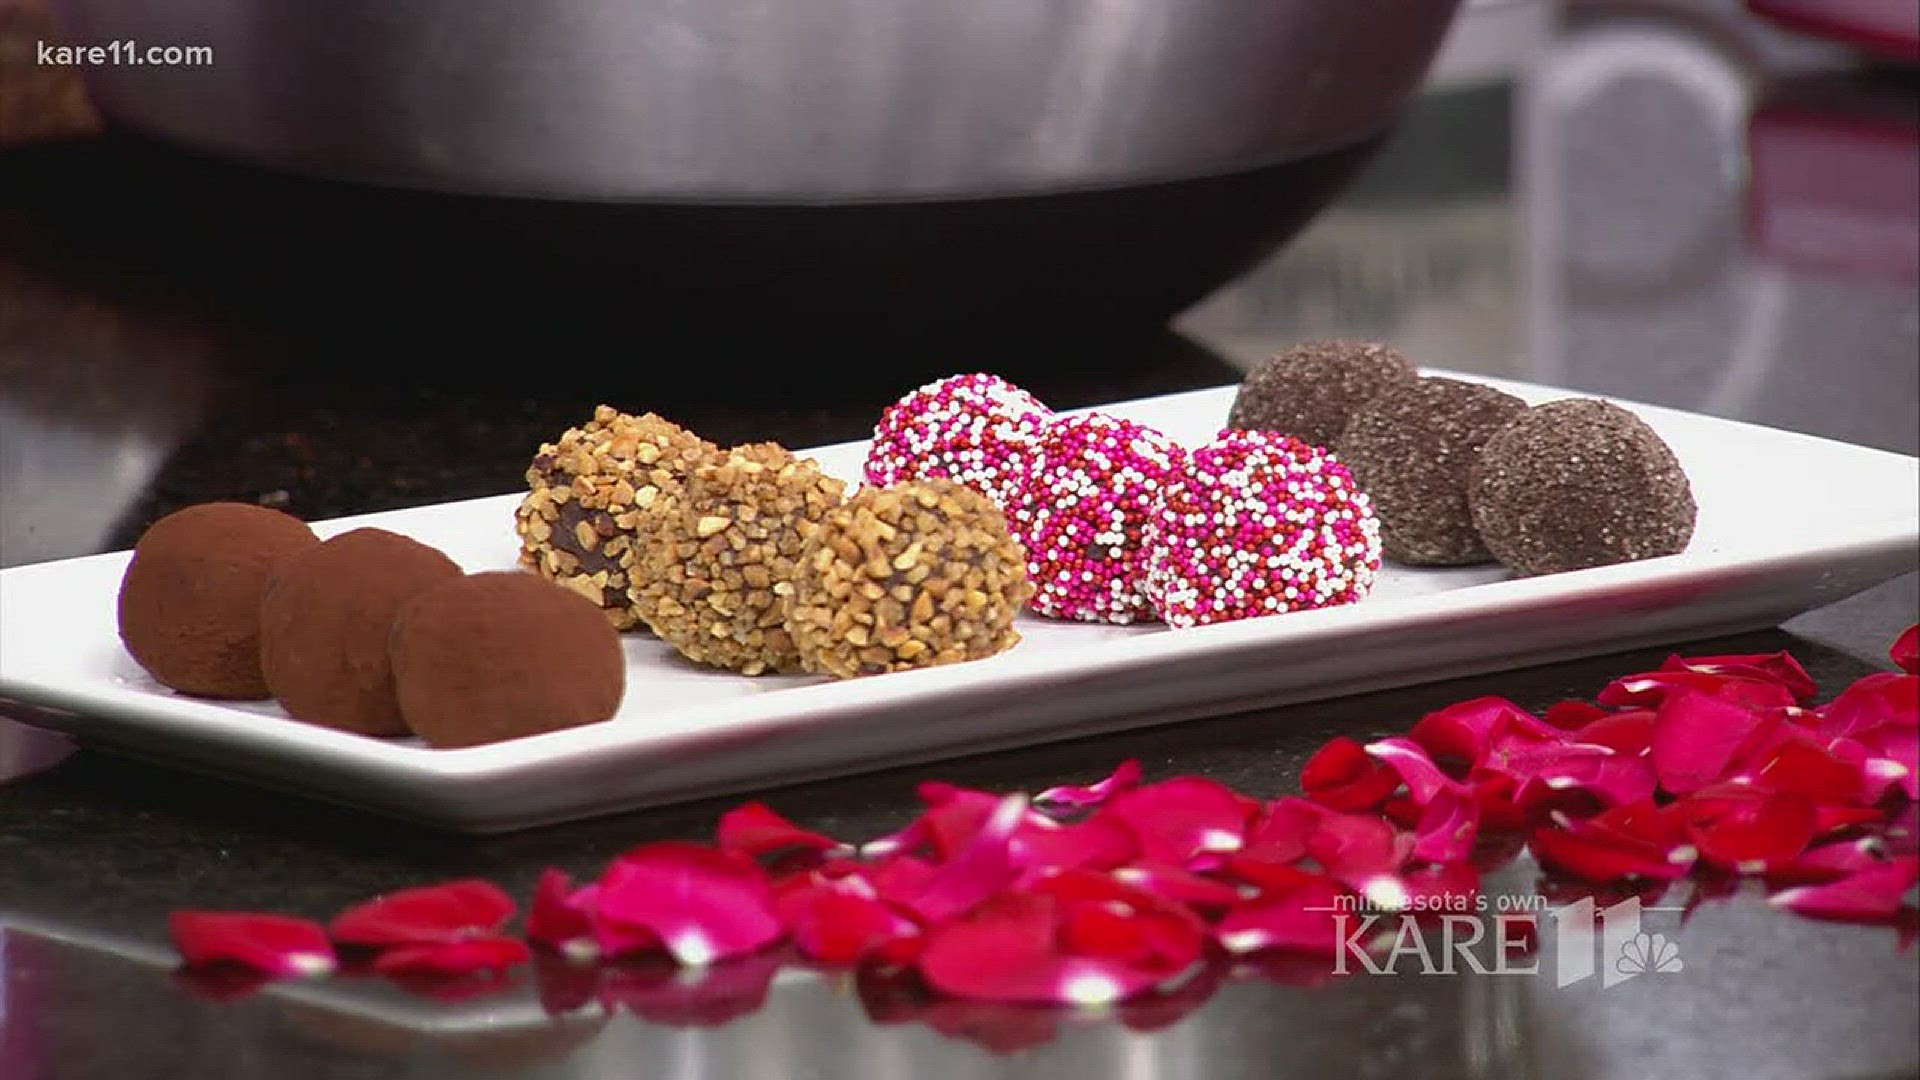 Robyn Dochterman from St. Croix Chocolate Company shares with us a homemade truffle recipe that you can make just in time for Valentine's Day!